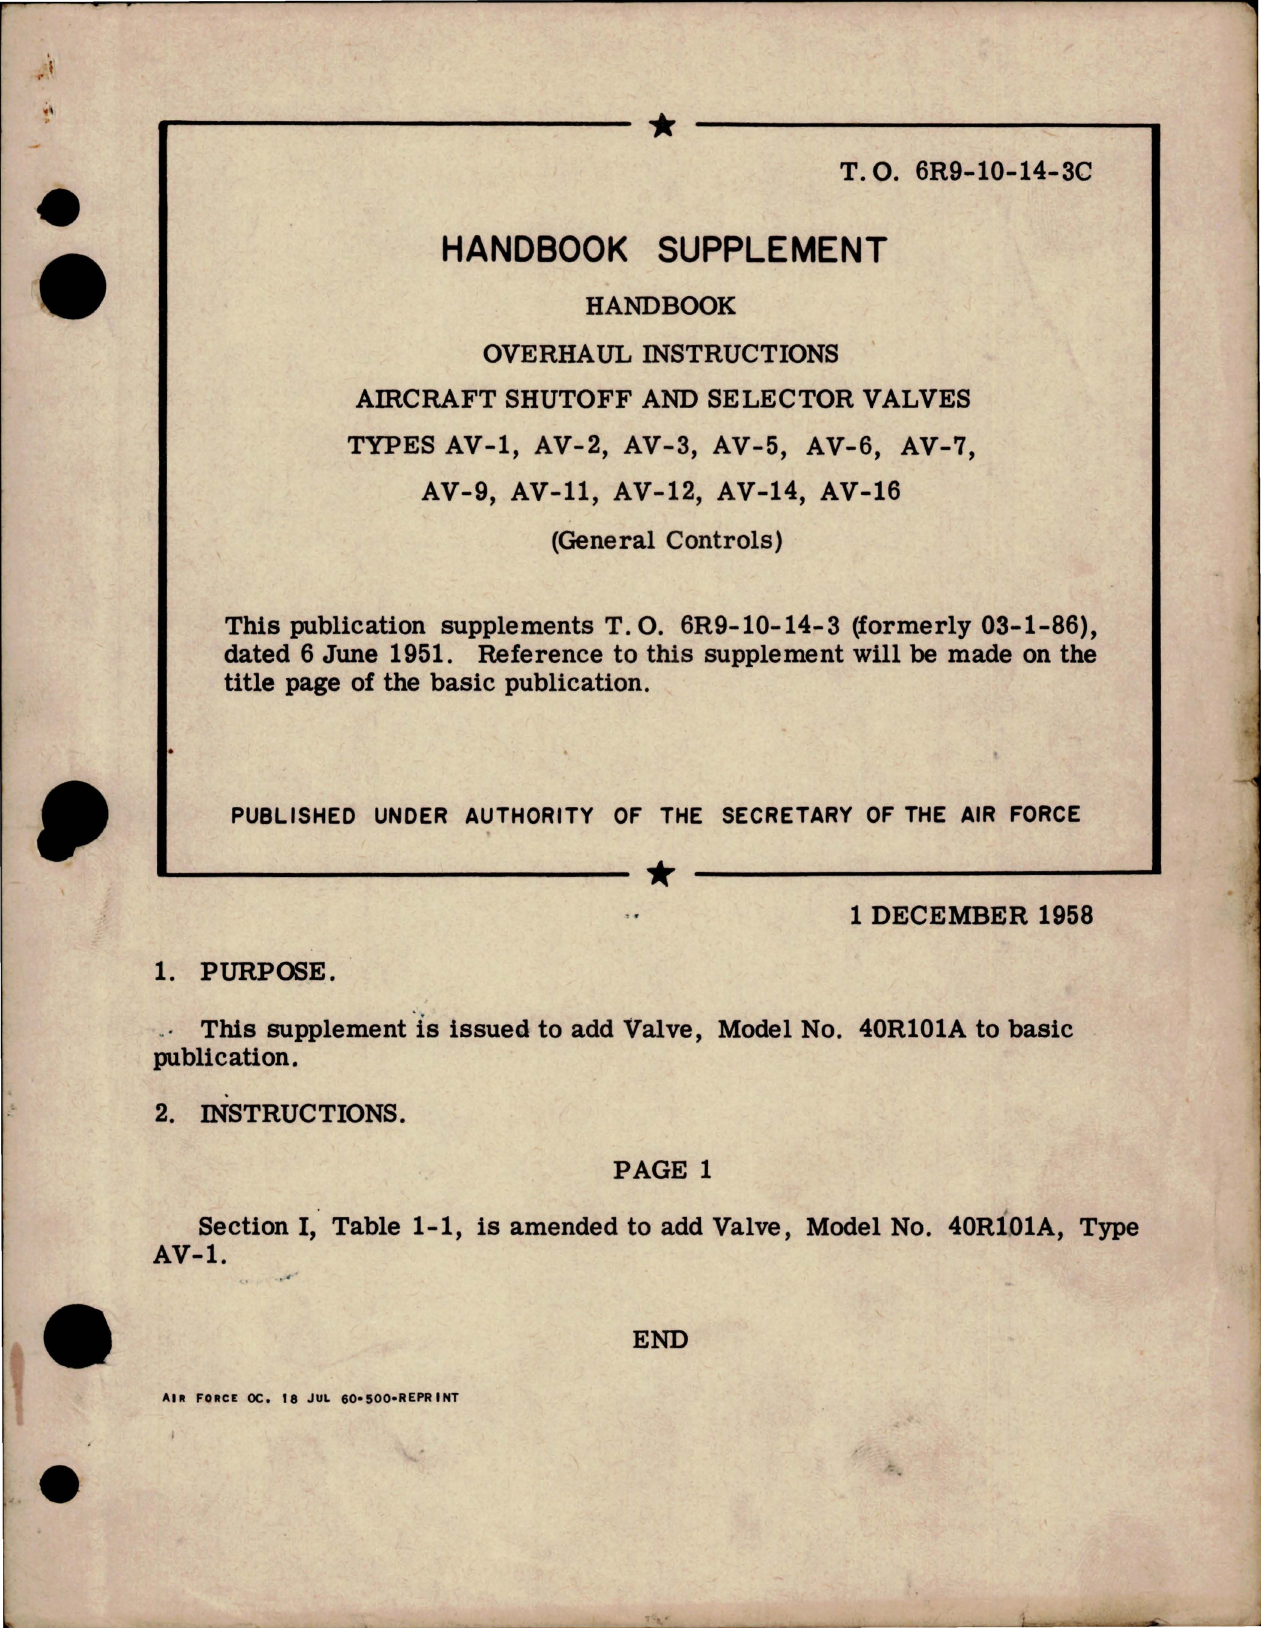 Sample page 1 from AirCorps Library document: Supplement to Overhaul Instructions for Aircraft Shutoff Valve and Selector Valves